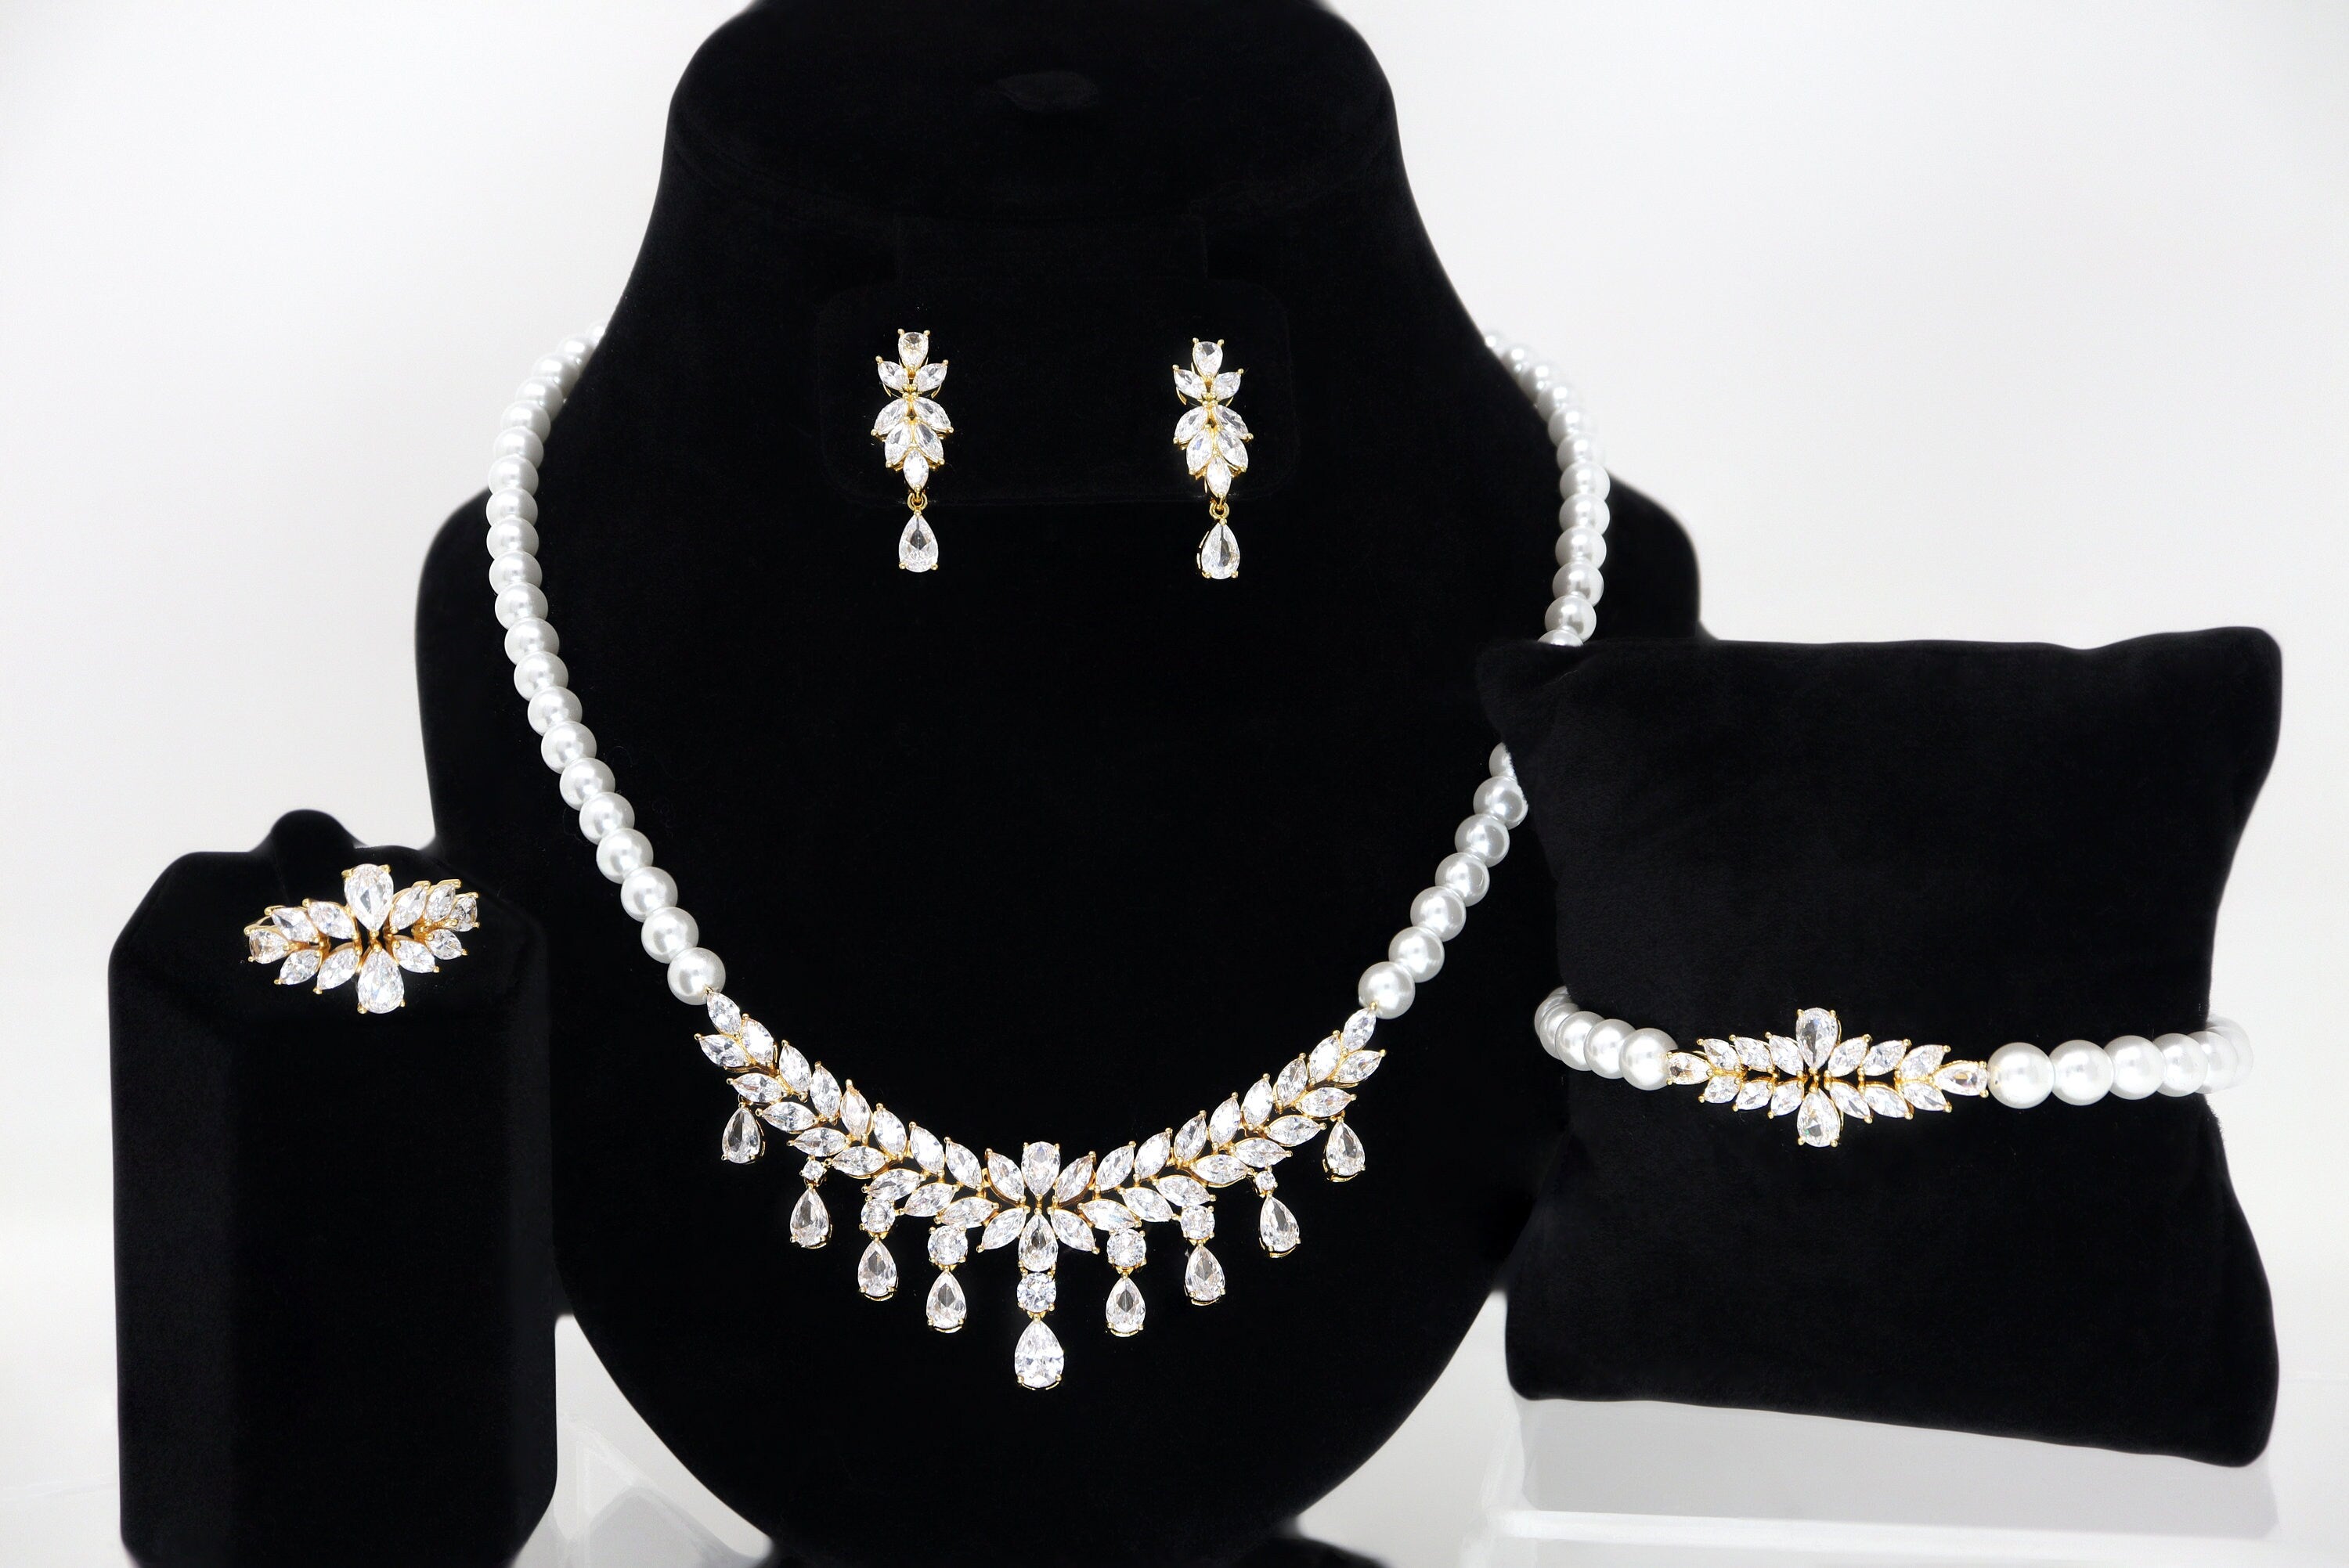 Swarovski Crystal And Pearl Luxury Flower drops Diamond/Crystal Necklace  Set, Bridal Necklace Set, Bridal Jewelry, Statement Necklace